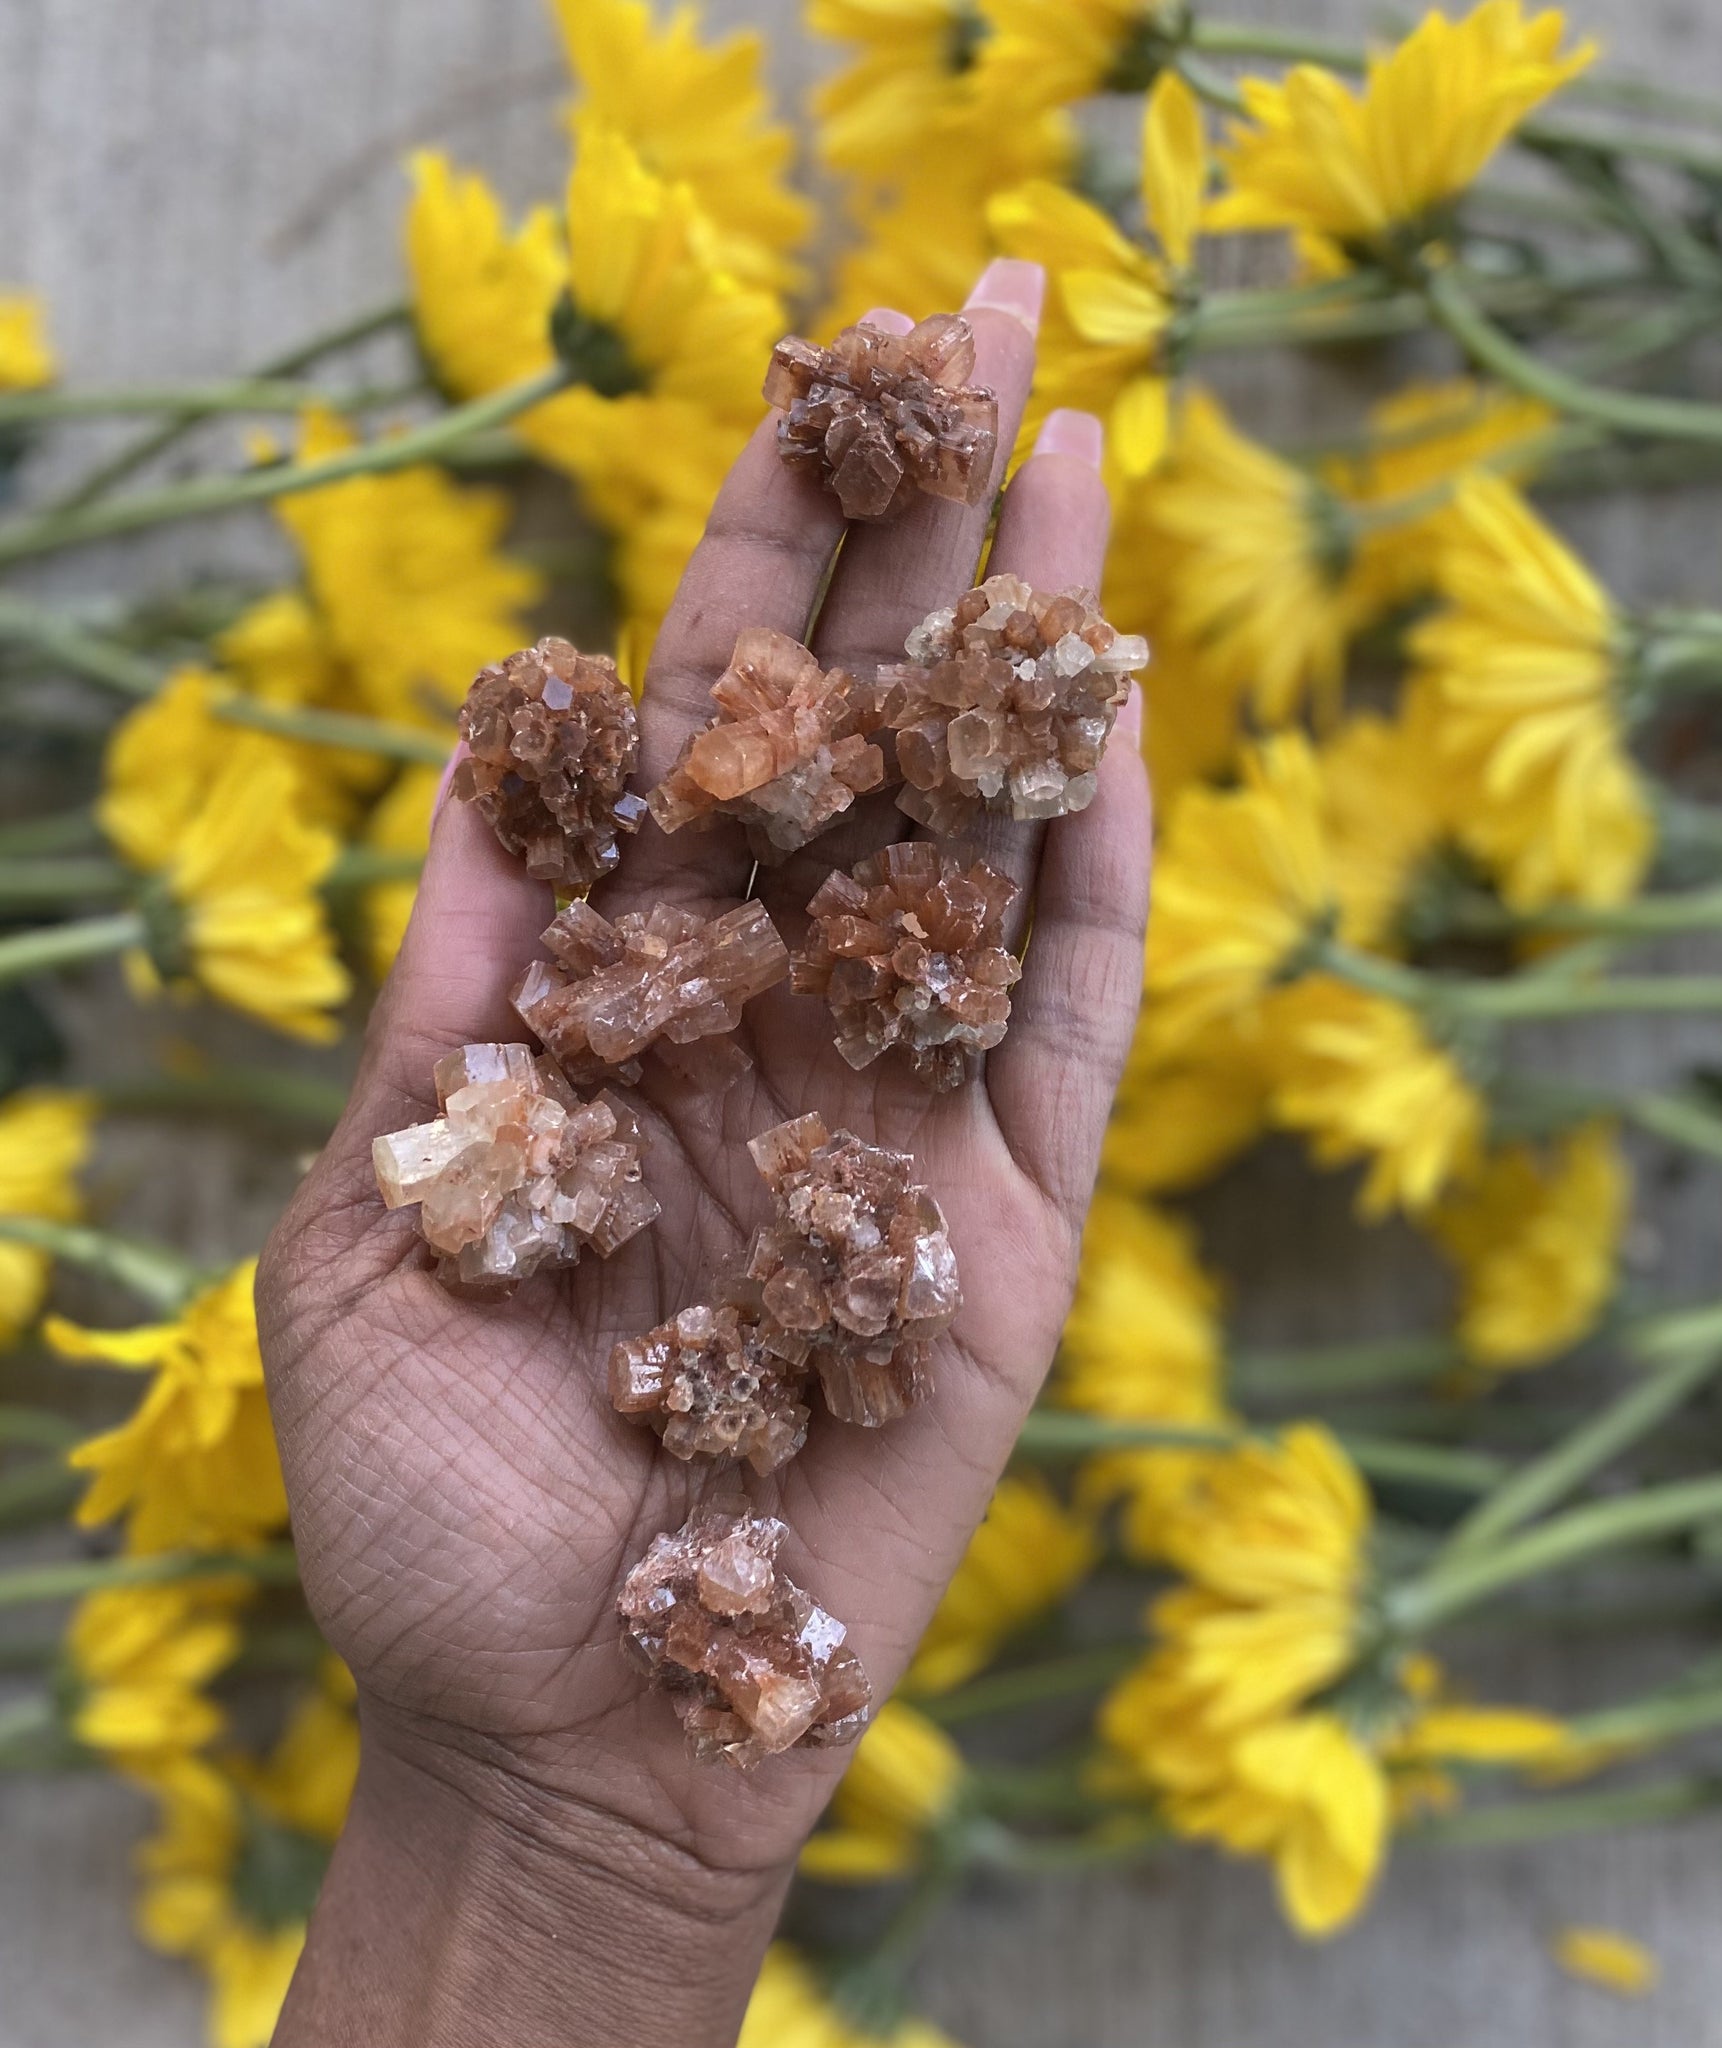 Aragonite facilitate grounding. By grounding, we're able to clear our minds and focus on the present moment. 